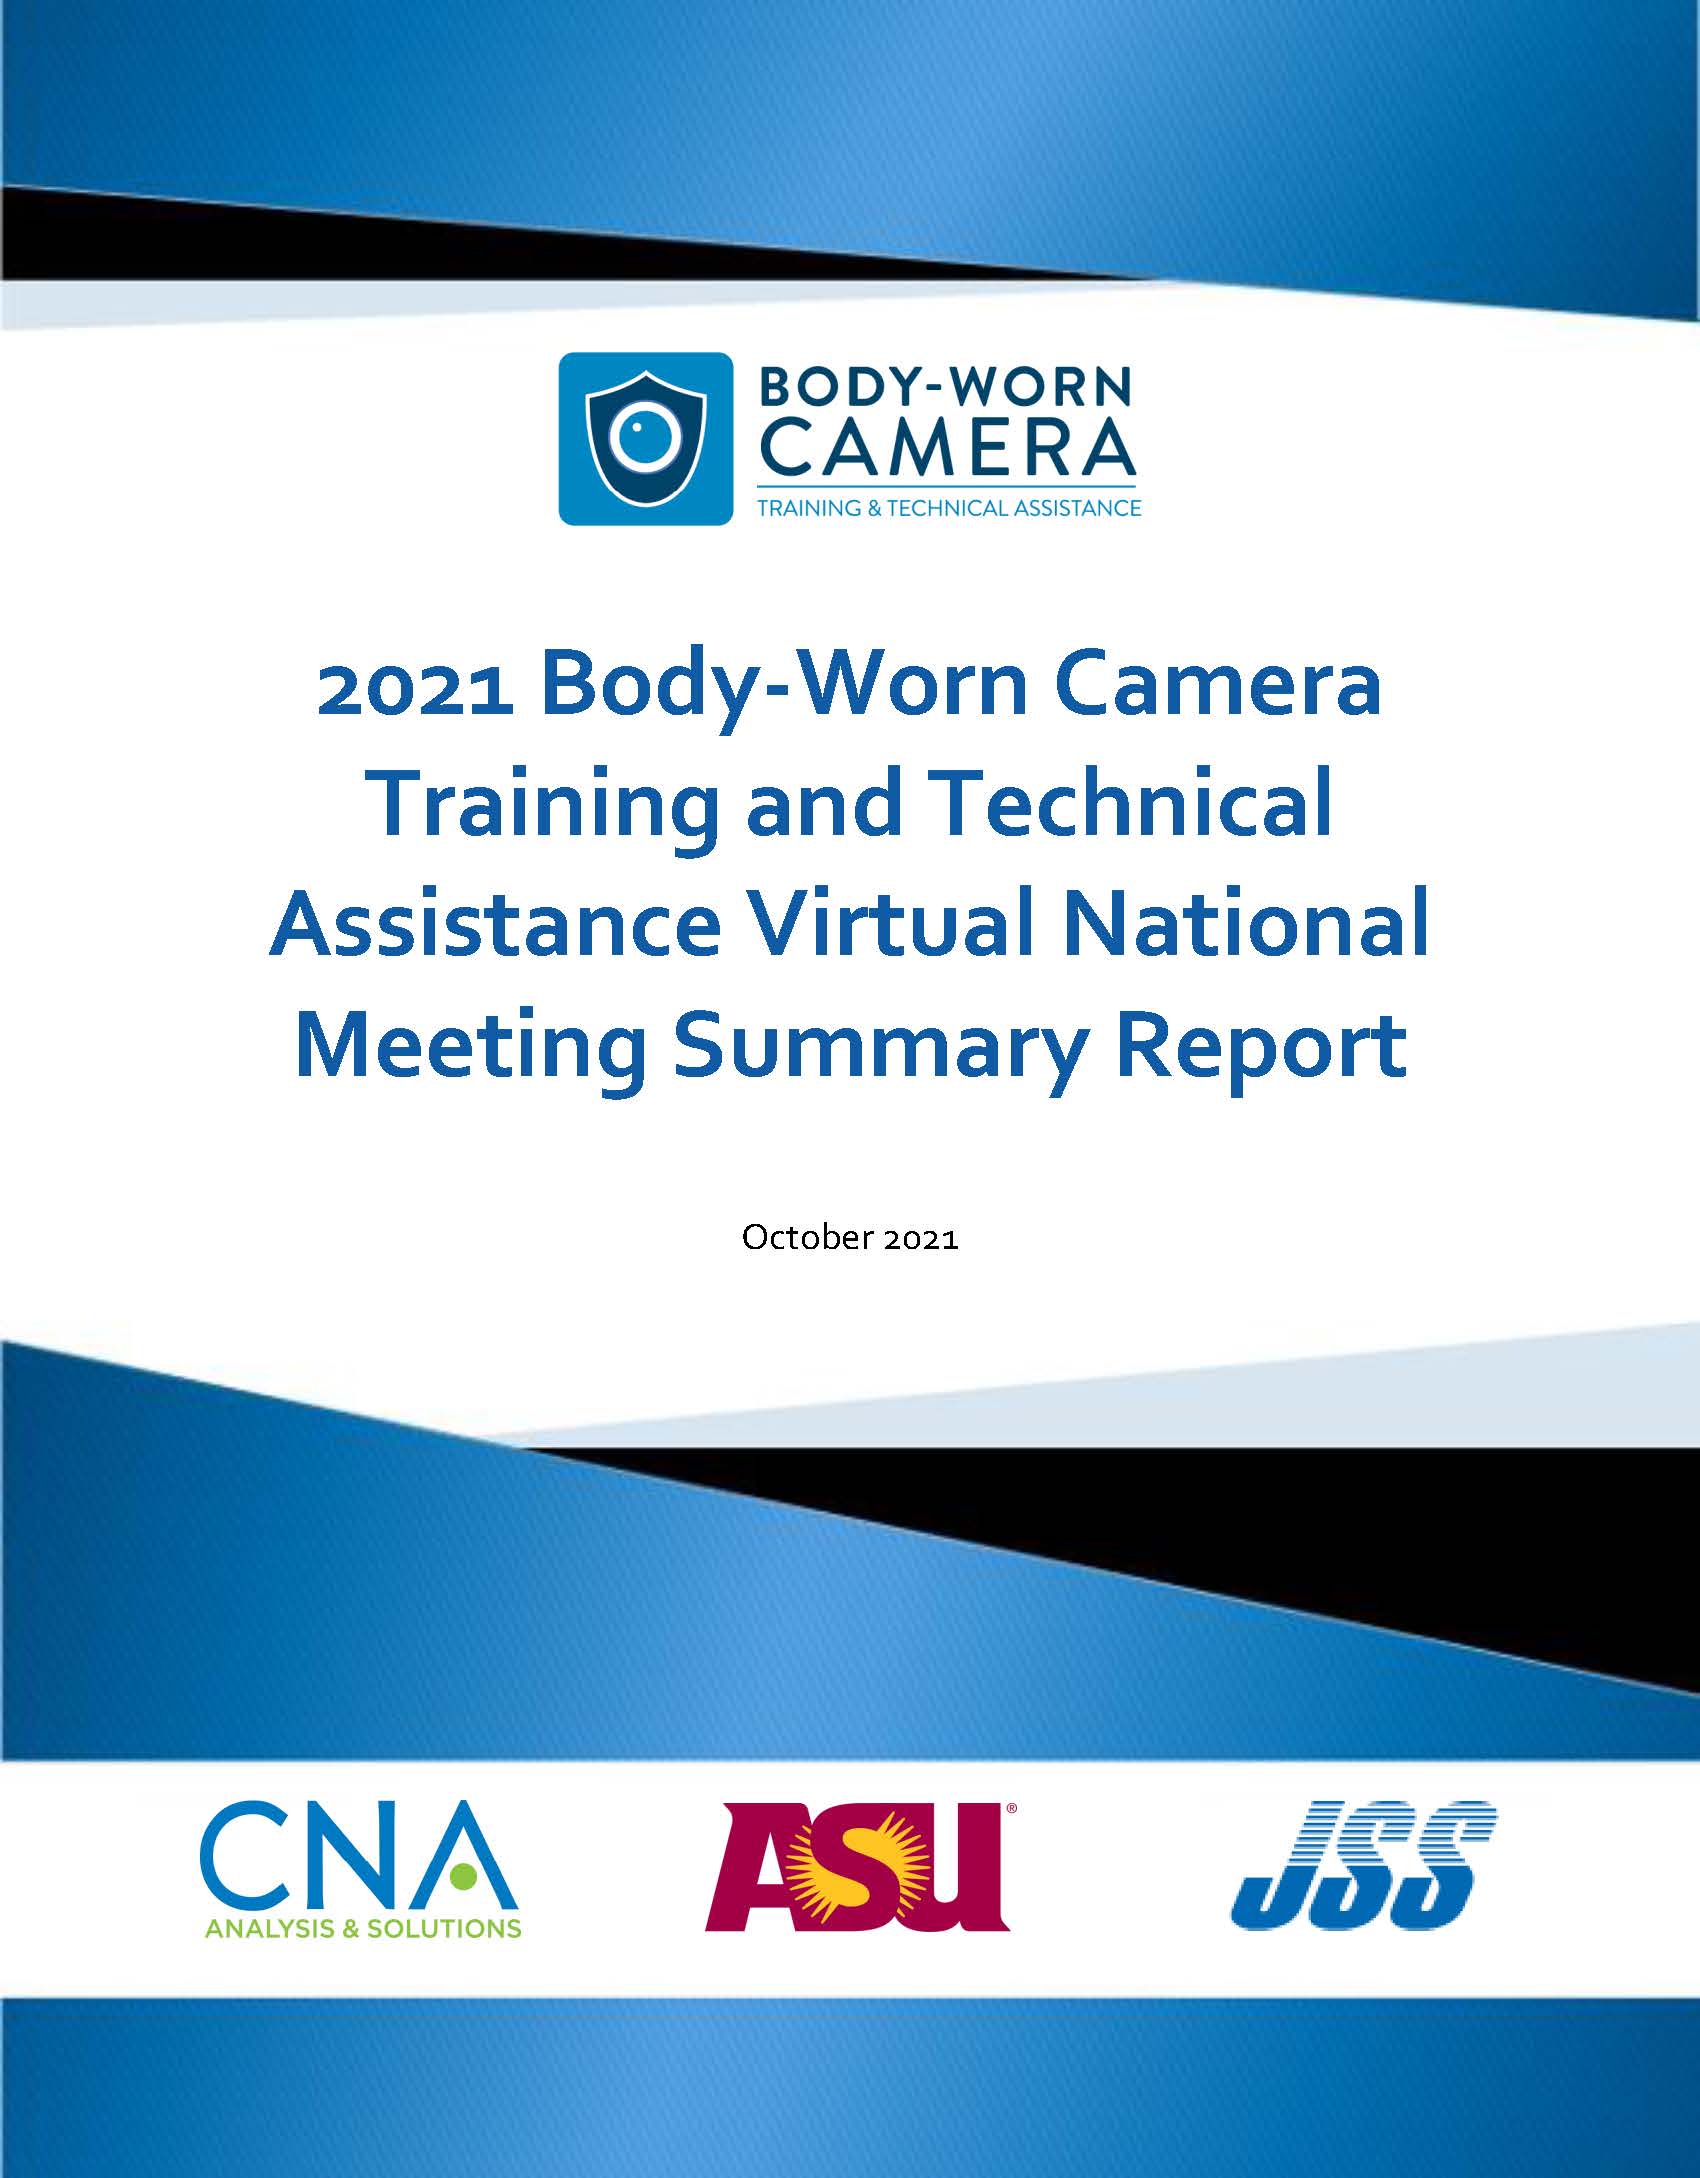 2021 Body-Worn Camera Training and Technical Assistance Virtual National Meeting Summary Report Cover Page